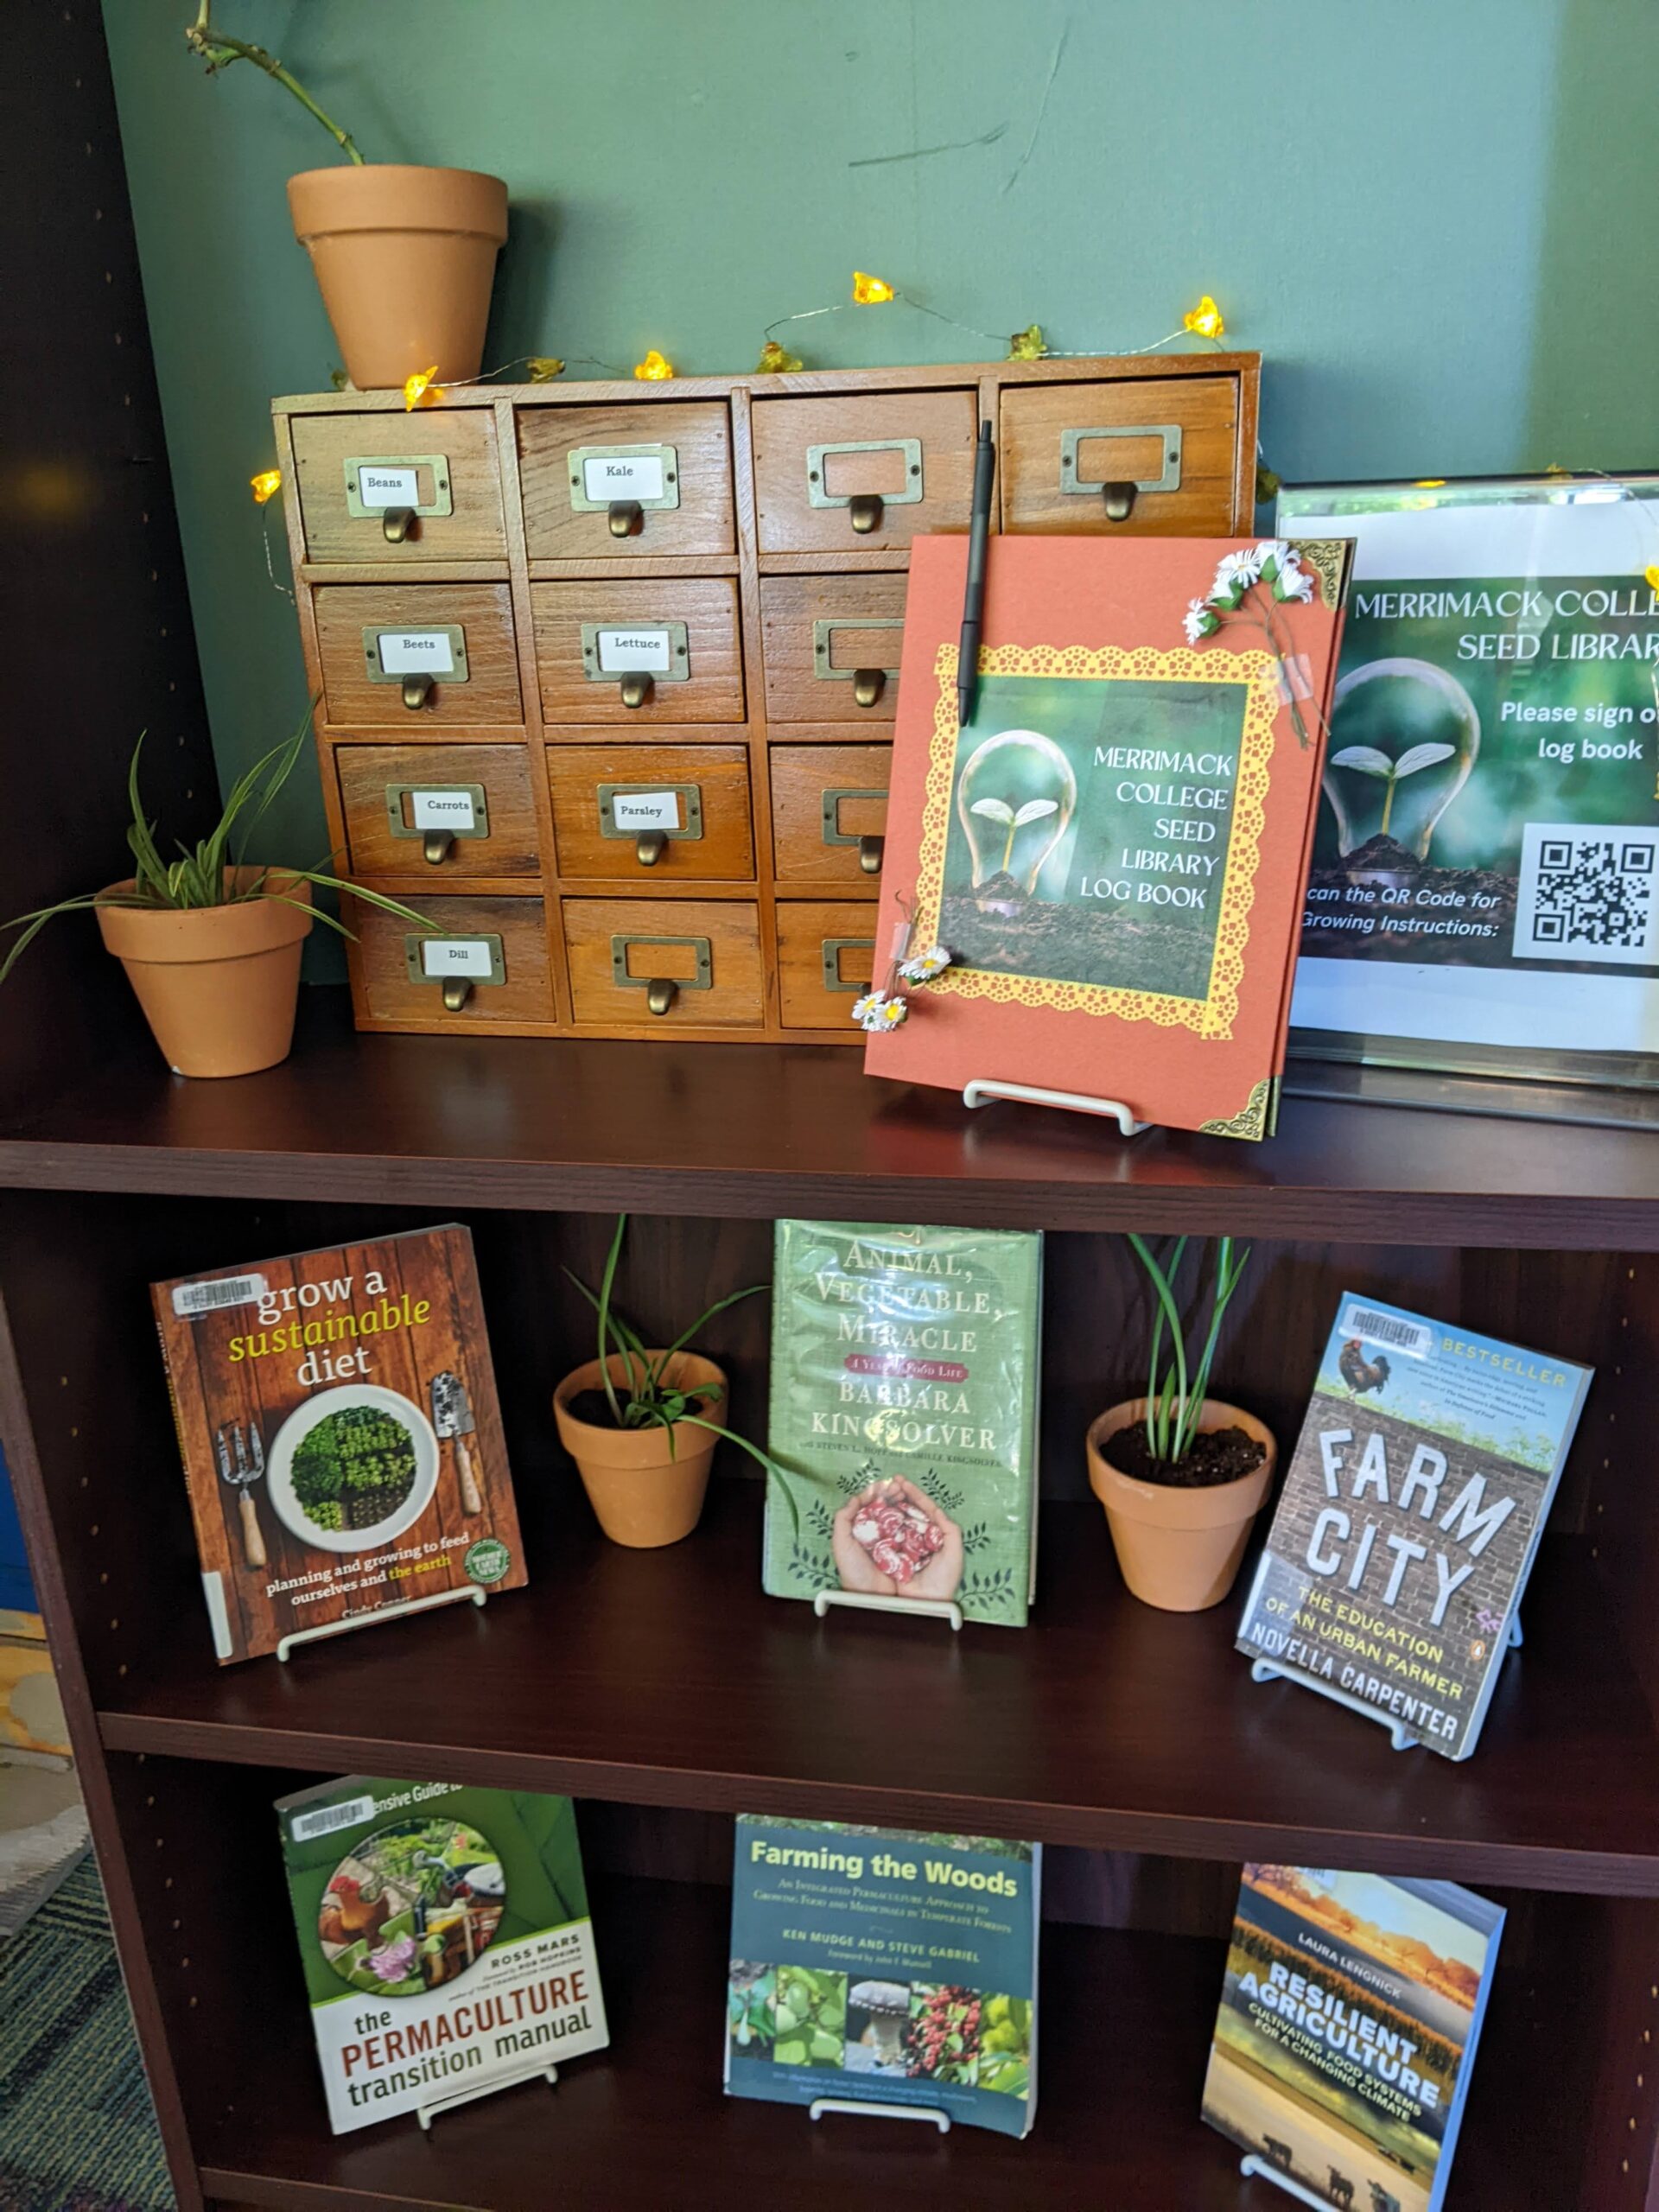 This image is of a book shelf with garden-related books on the bottom and a seed library on the top in a card catalog-type box.